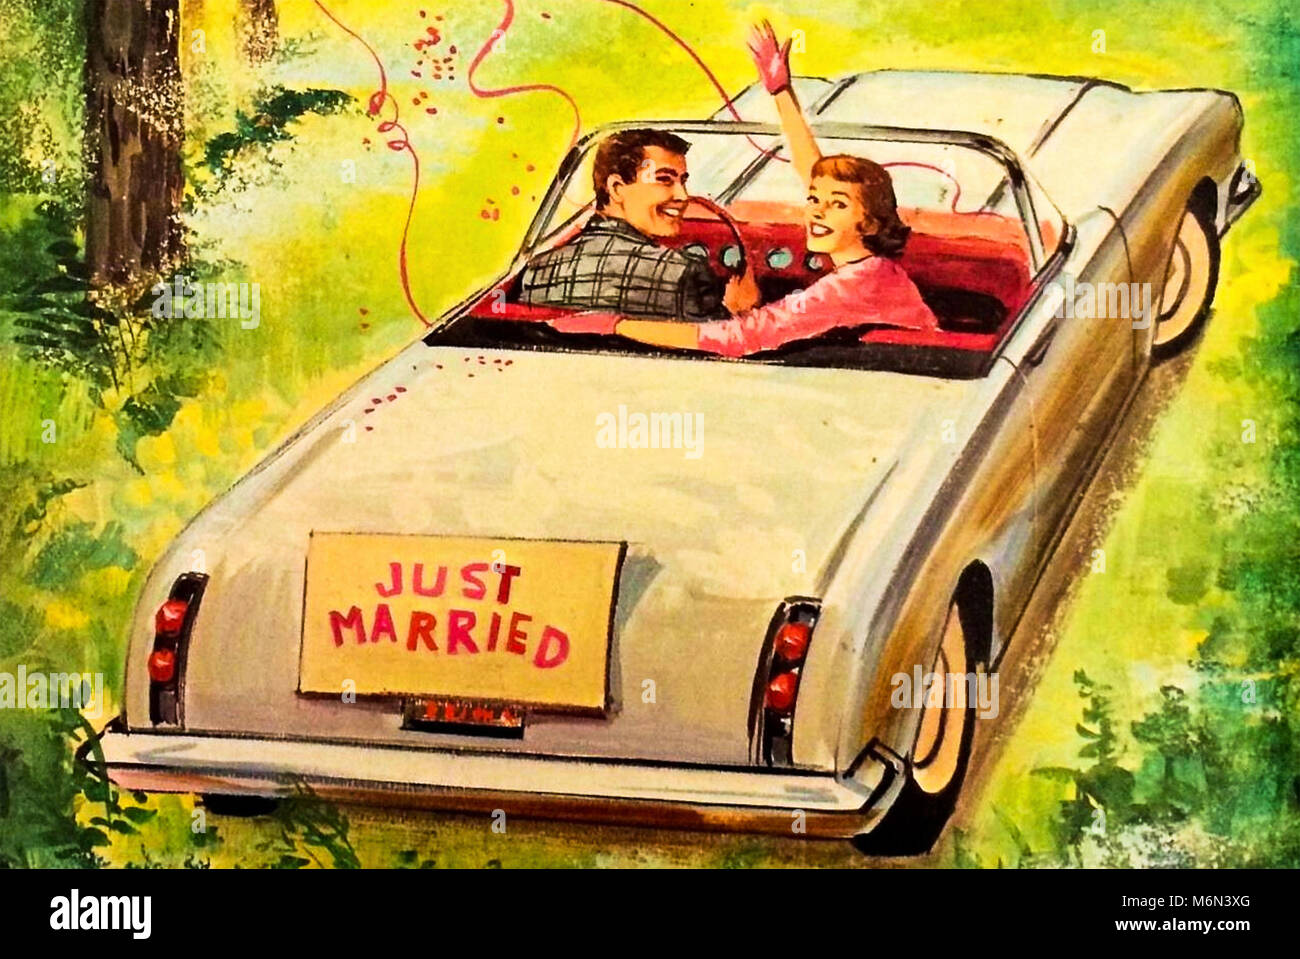 JUST MARRIED 1950s illustration Stock Photo